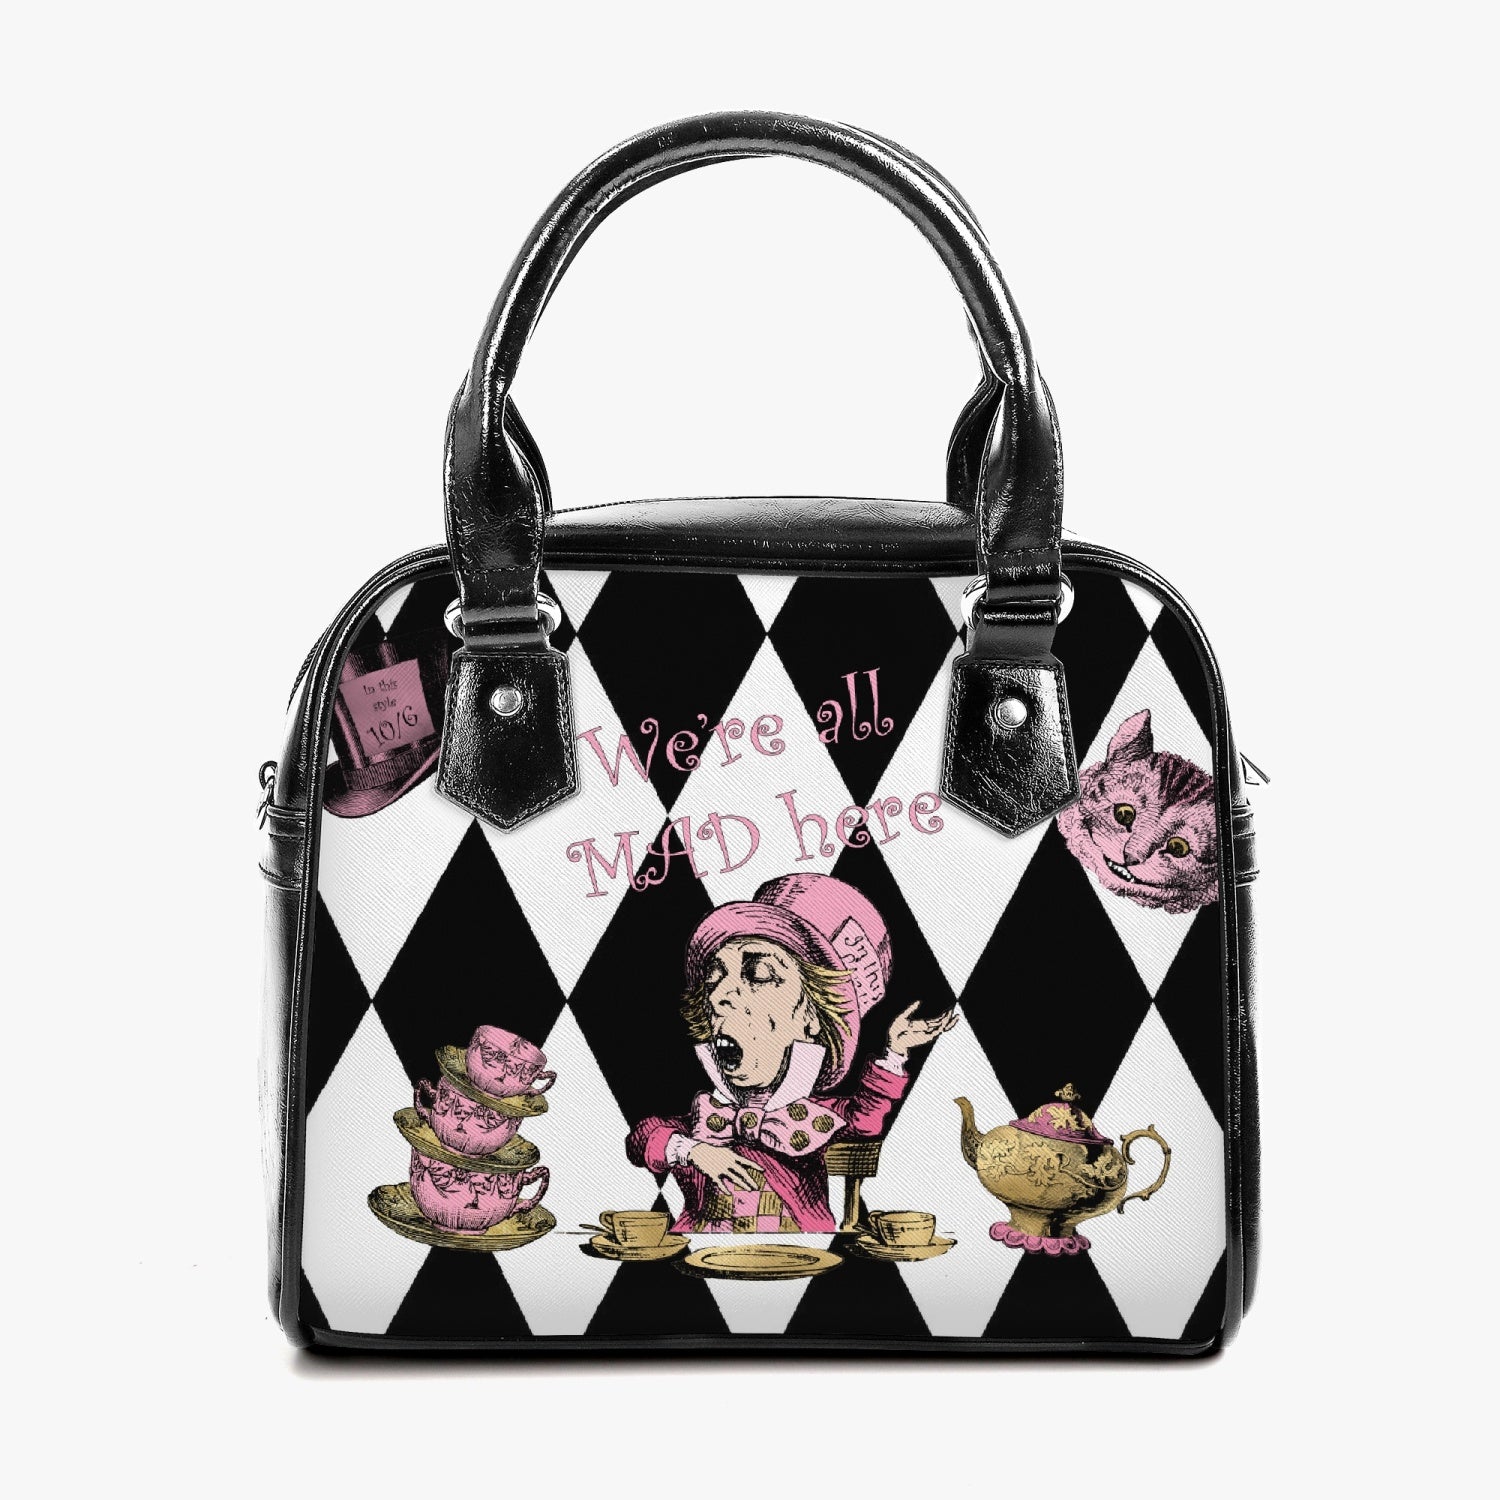 Mad hatter handbag featuring the mad hatter surrounded by teacups, teapots and top hats on a black and white diamond background.  The bag has black handles and shoulder strap.  With the quote 'we're all mad here' 